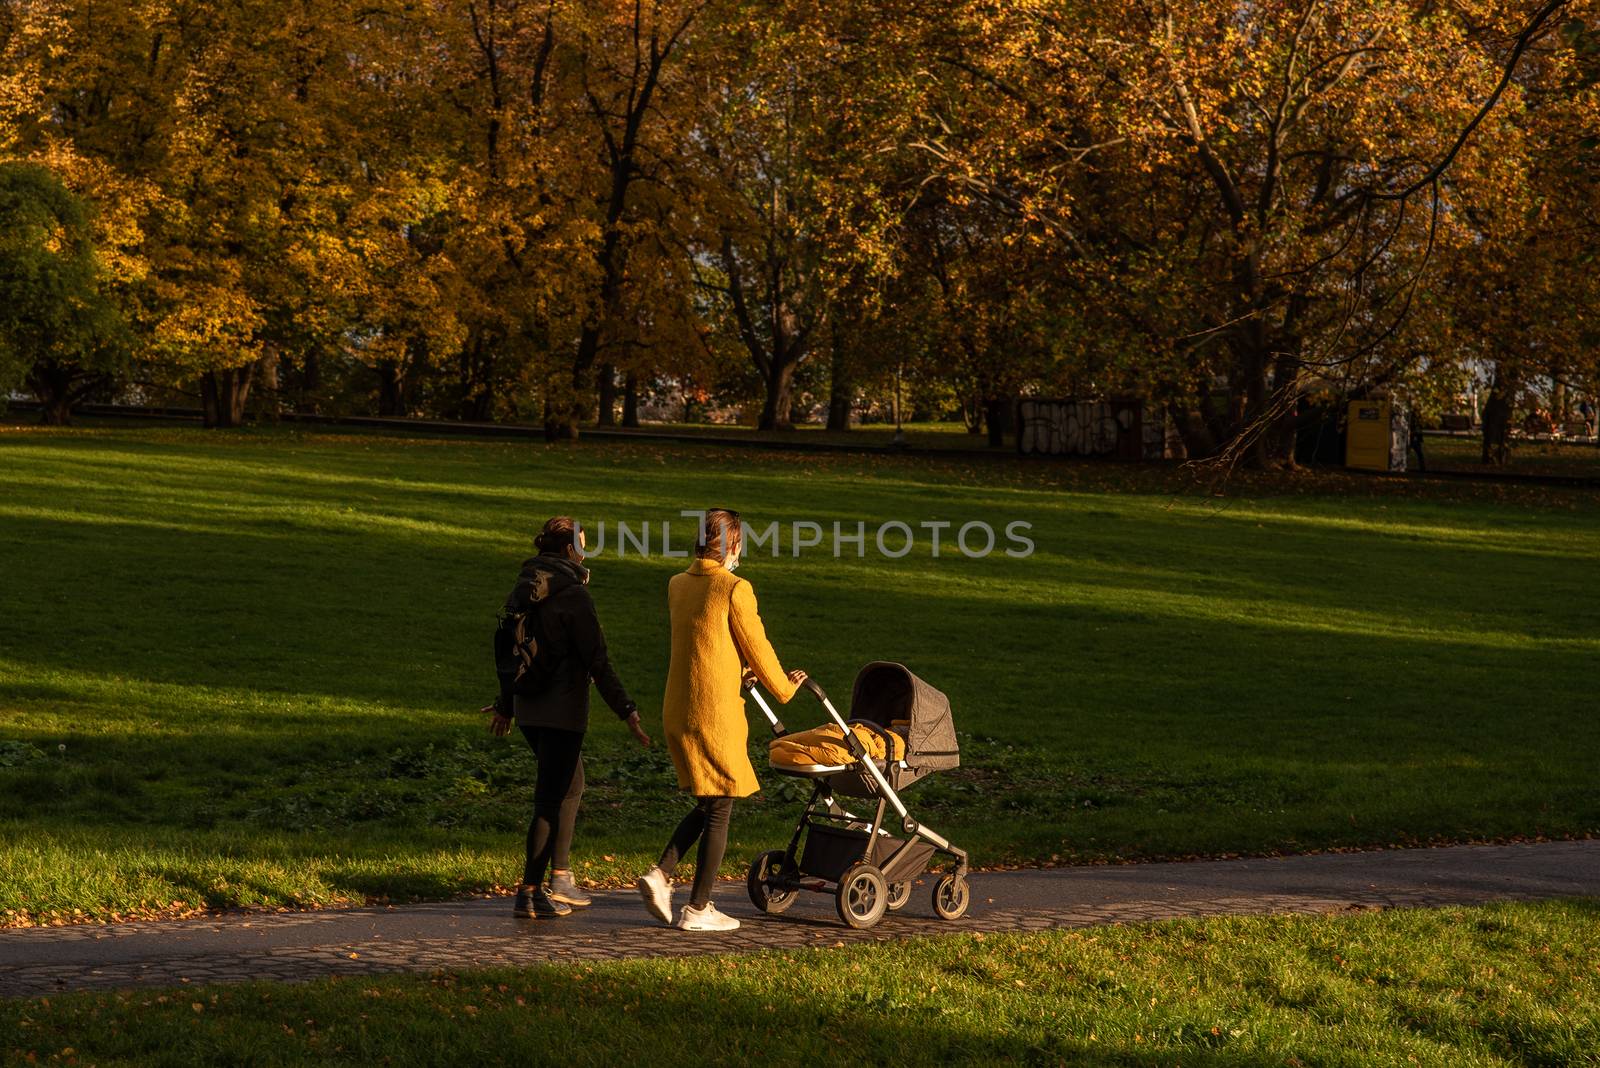 Two woman (one carrying a baby stroll) are enjoying a walk Autumn 2020 on Prague 6, during quarantine period due to outbreak of COVID-19 as winter is starting, Czech Republic by gonzalobell